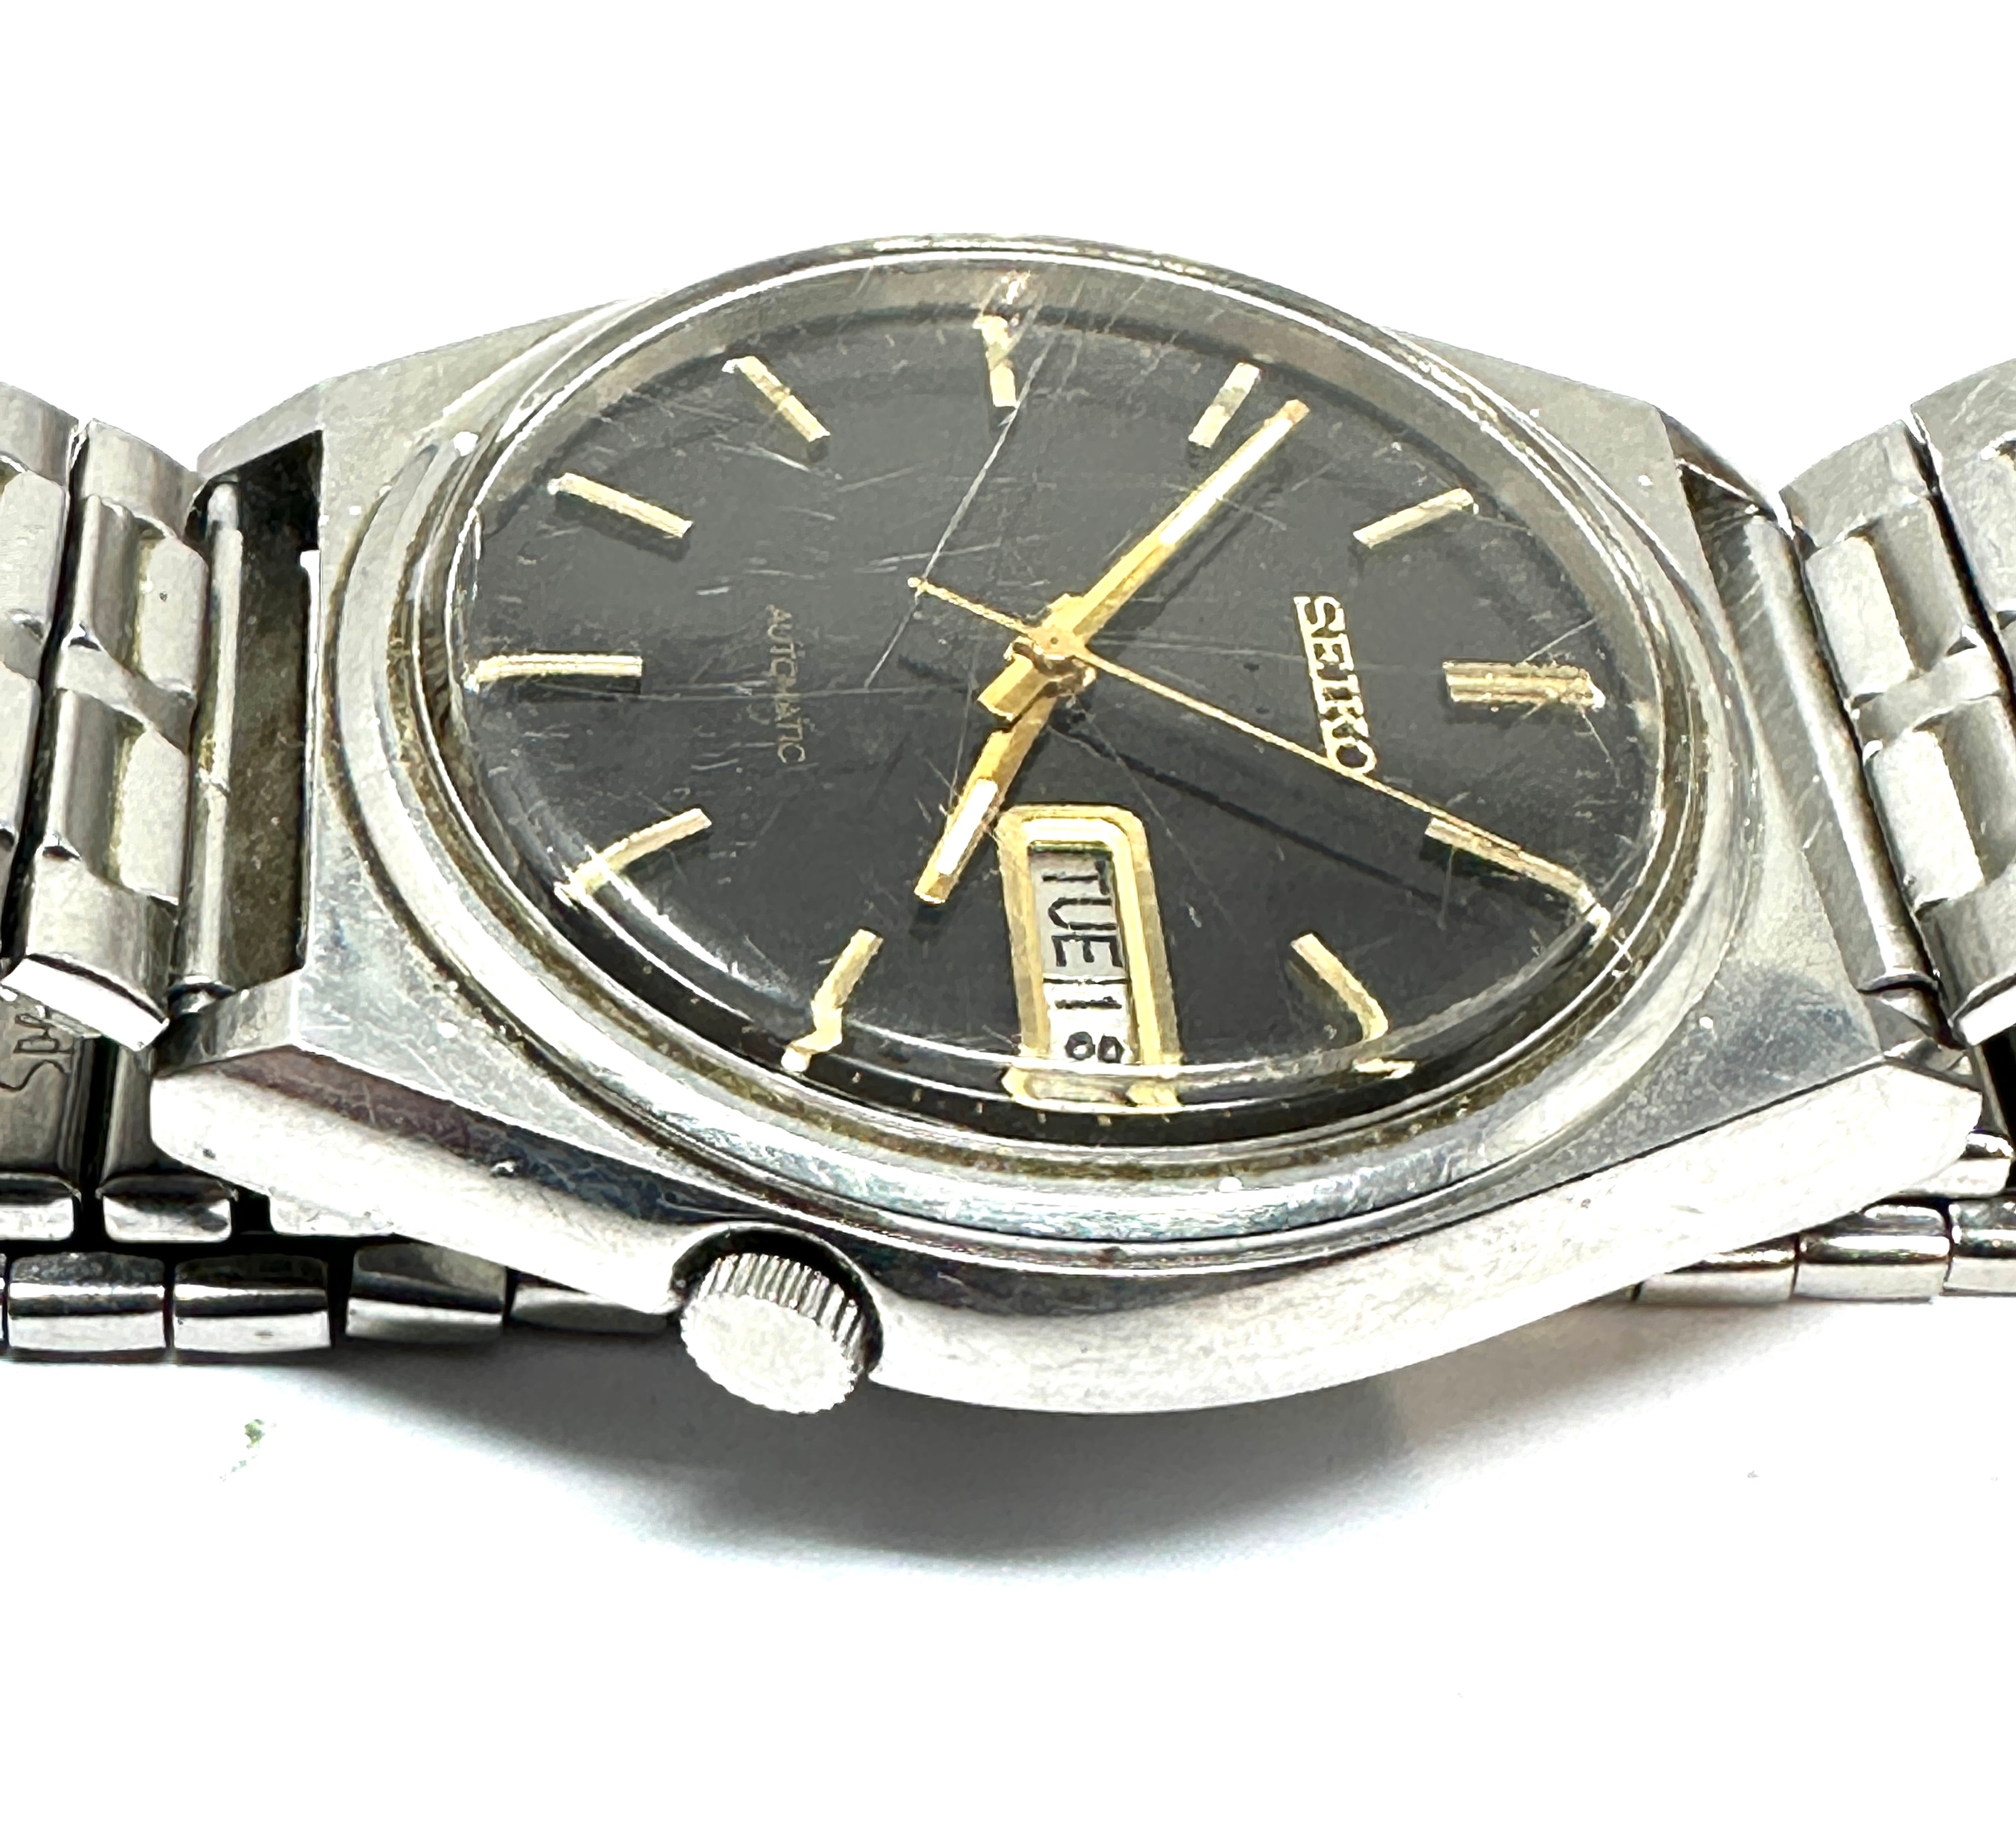 Vintage Gents Seiko automatic 7009-3140 wrist watch the watch is ticking - Image 2 of 3